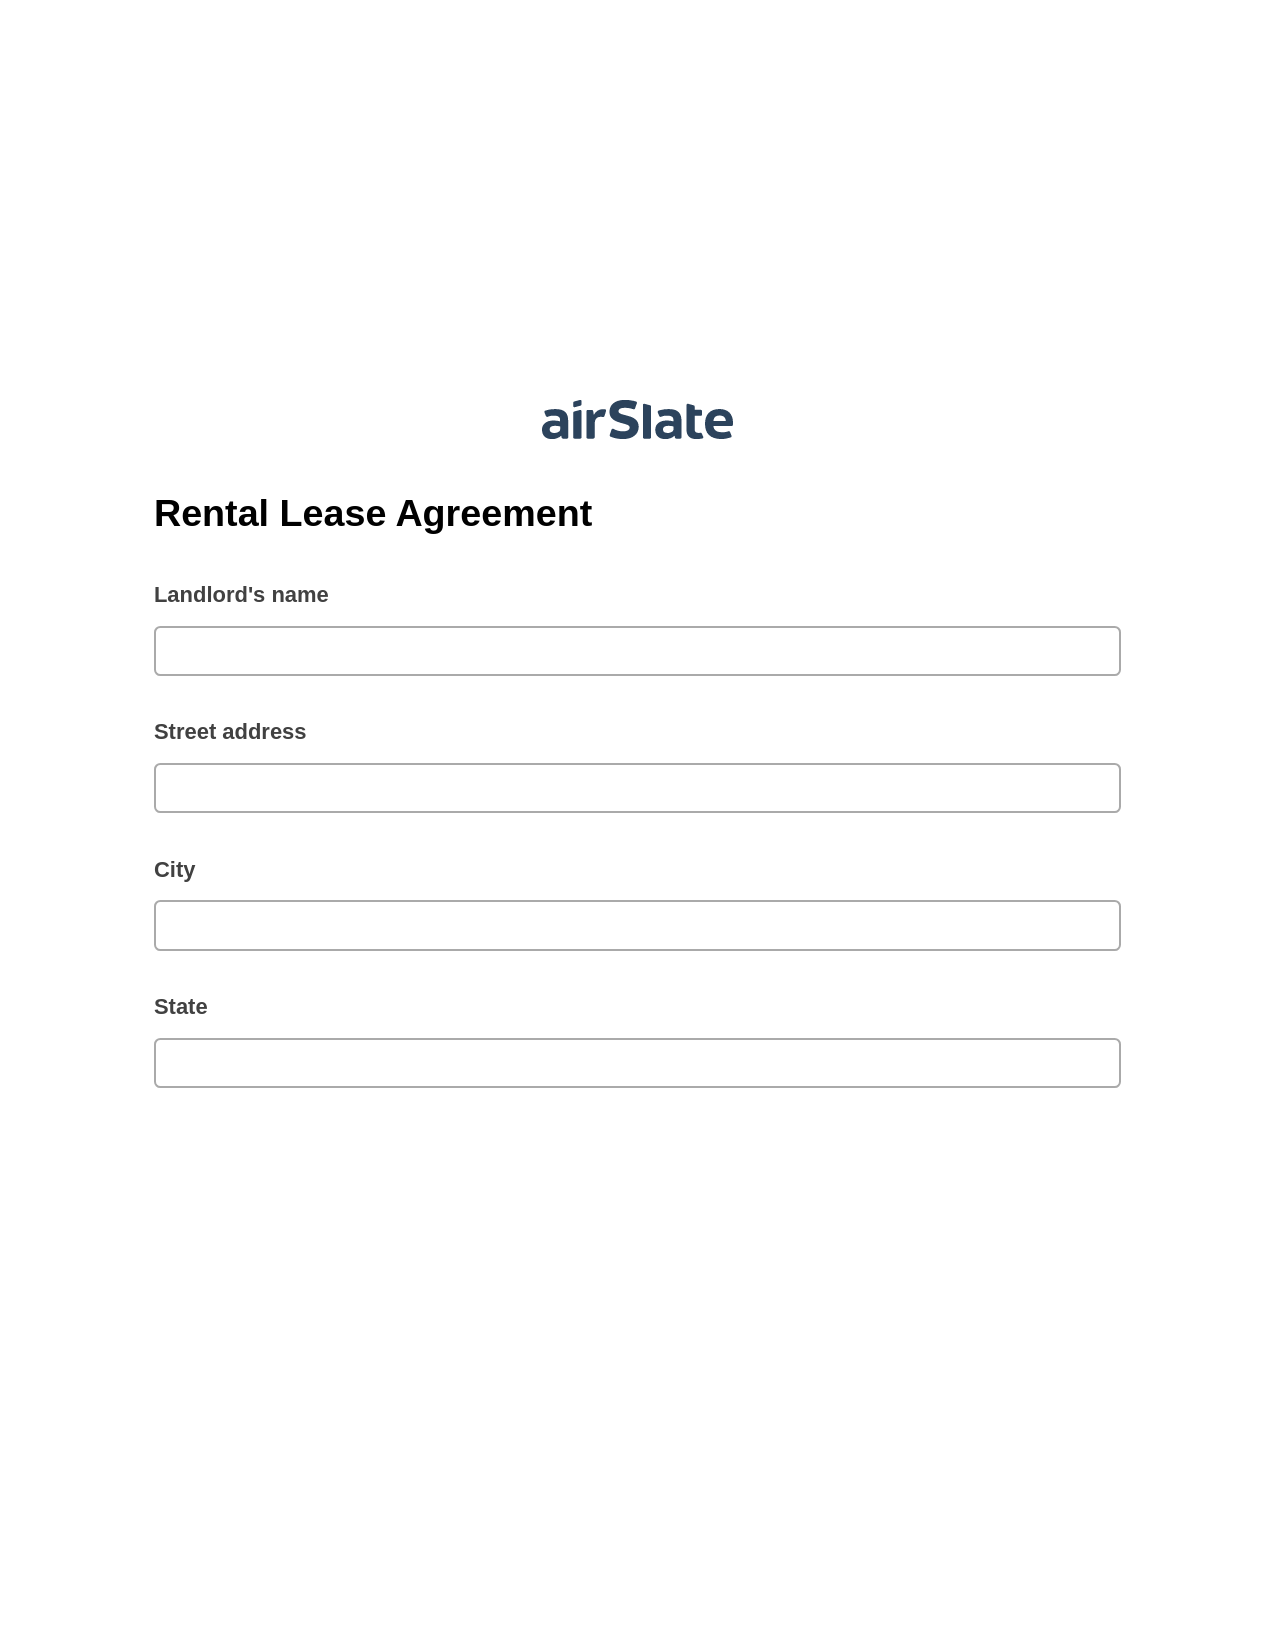 Multirole Rental Lease Agreement Pre-fill from Excel Spreadsheet Dropdown Options Bot, Jira Bot, Export to NetSuite Record Bot